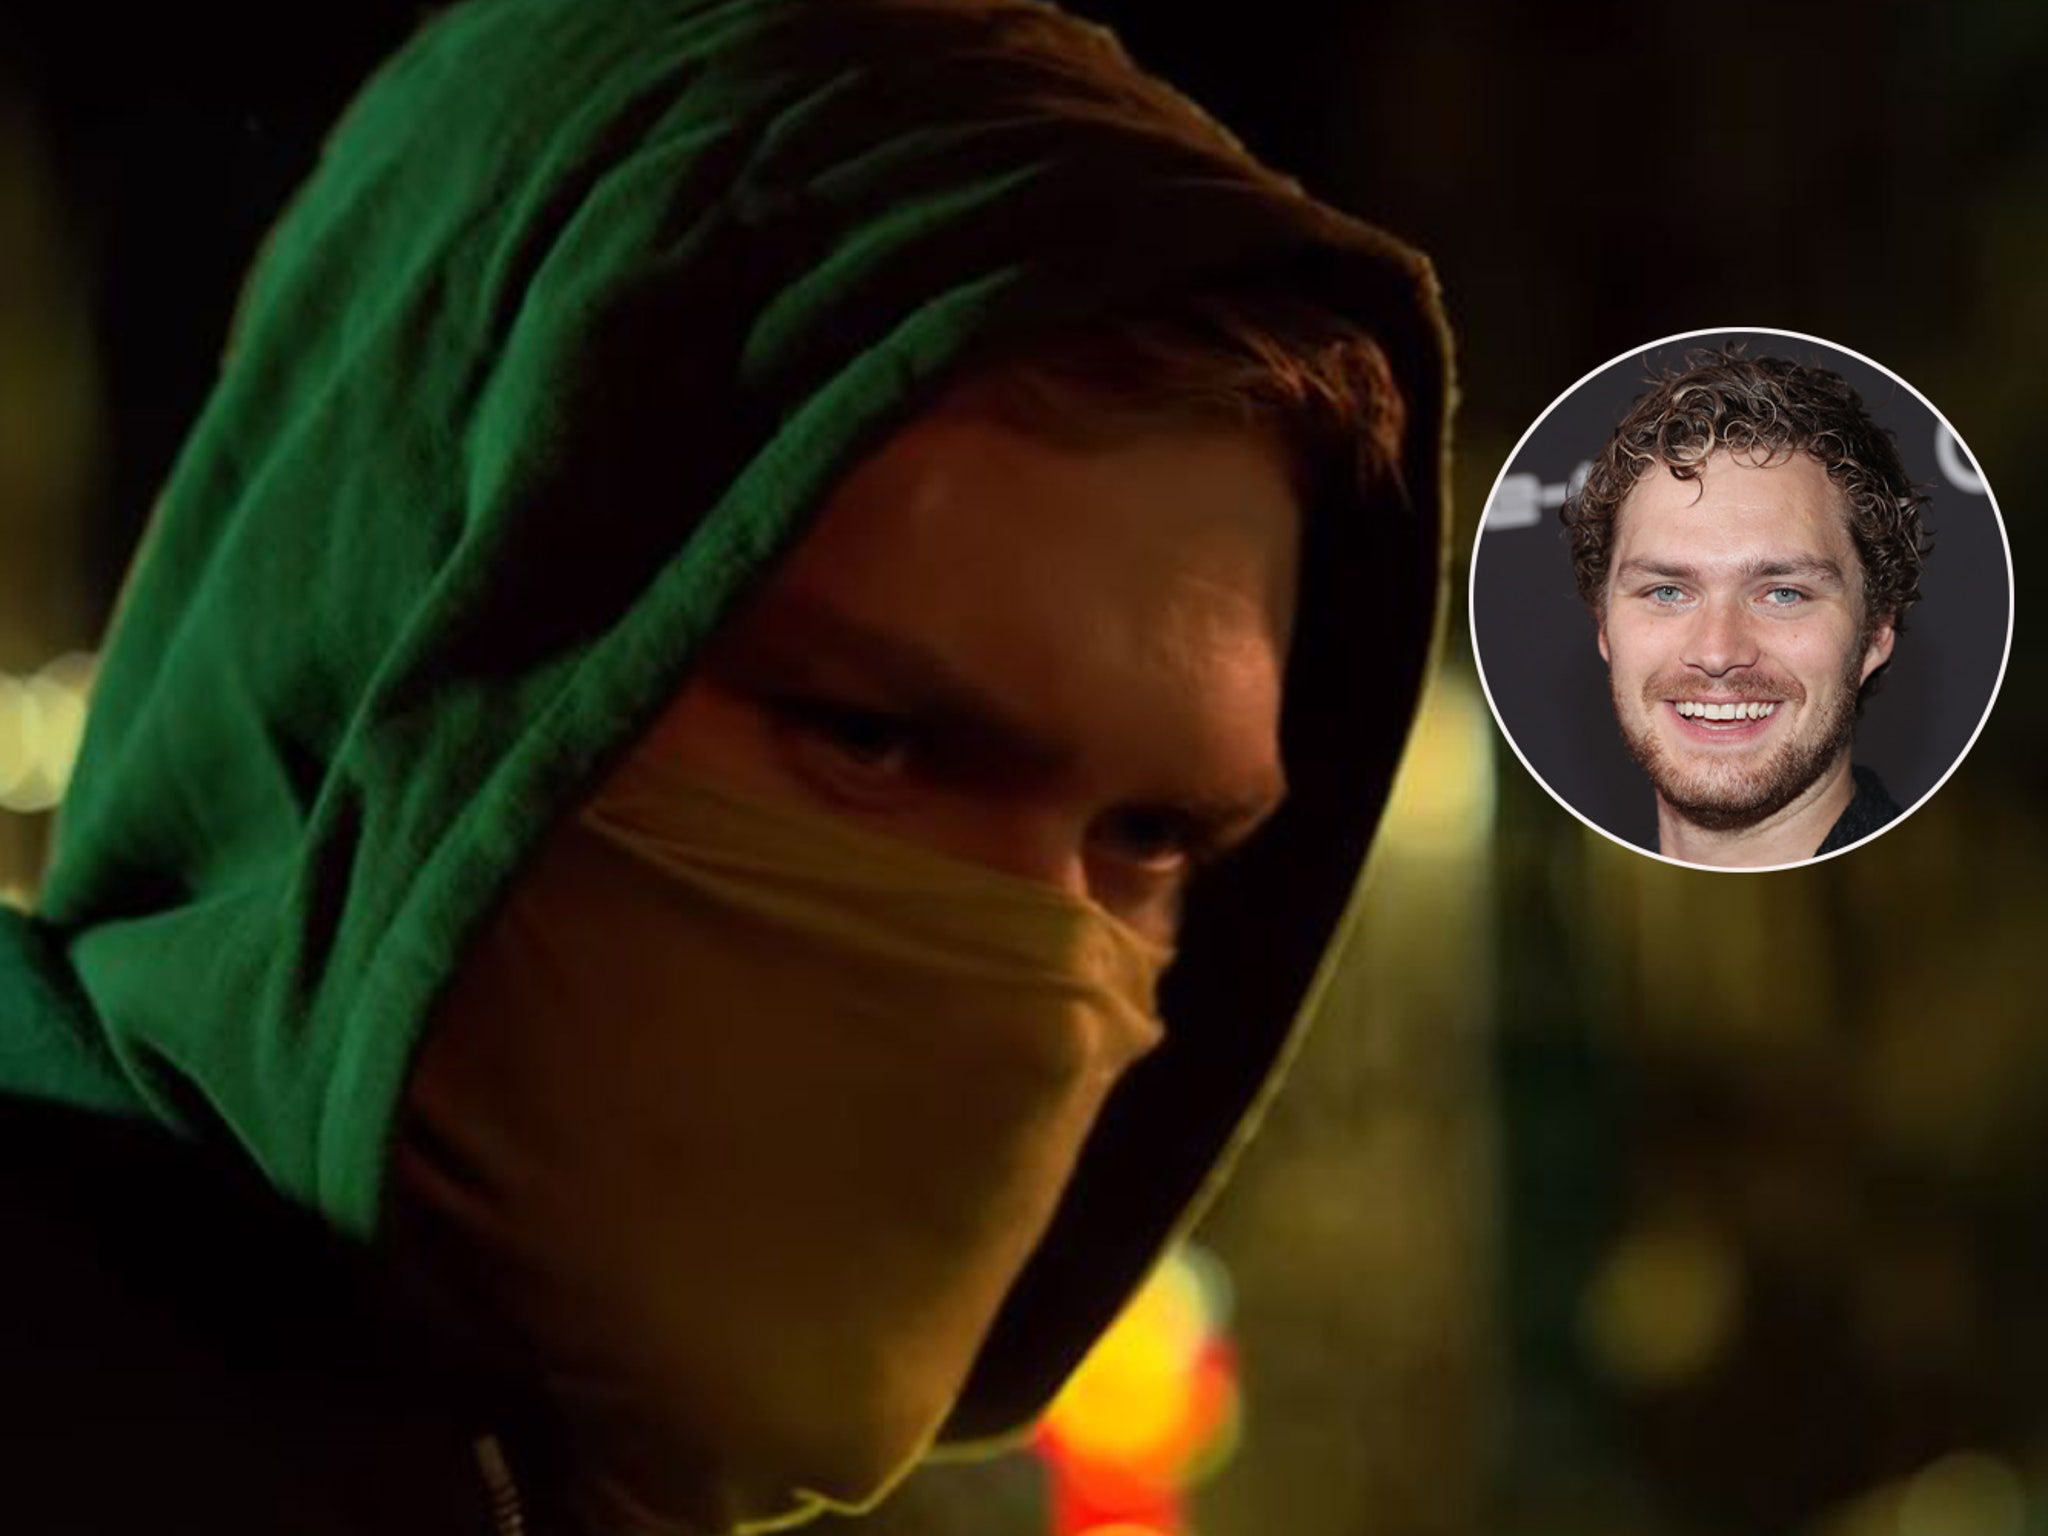 What 'Iron Fist' Season 2 has to offer